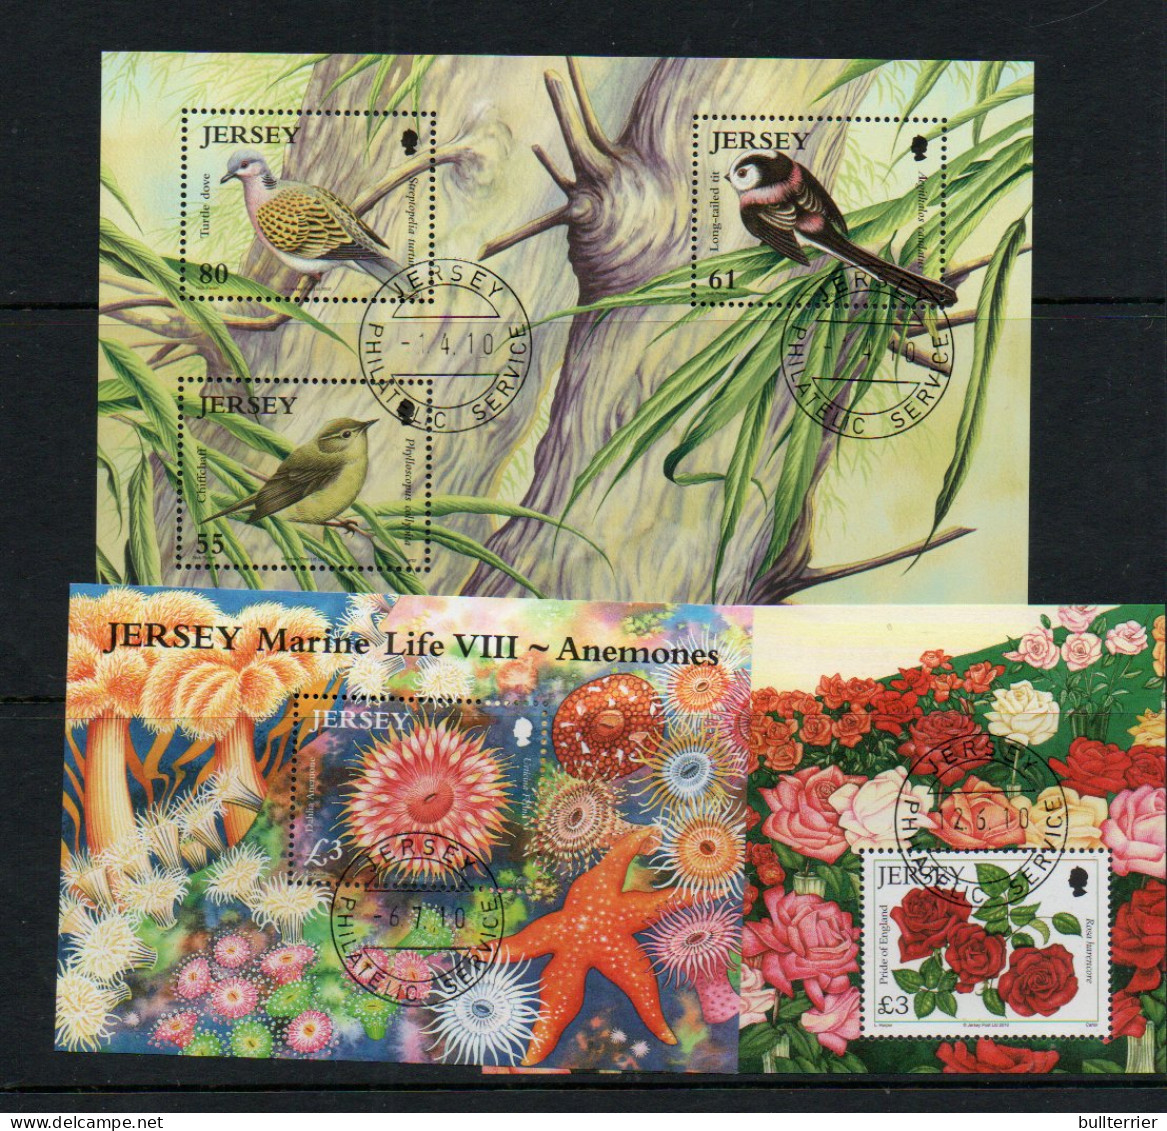 JERSEY - 2010 - BIRDS, ANENOMES AND ROSES S/SHEETS FINE USED  - Jersey